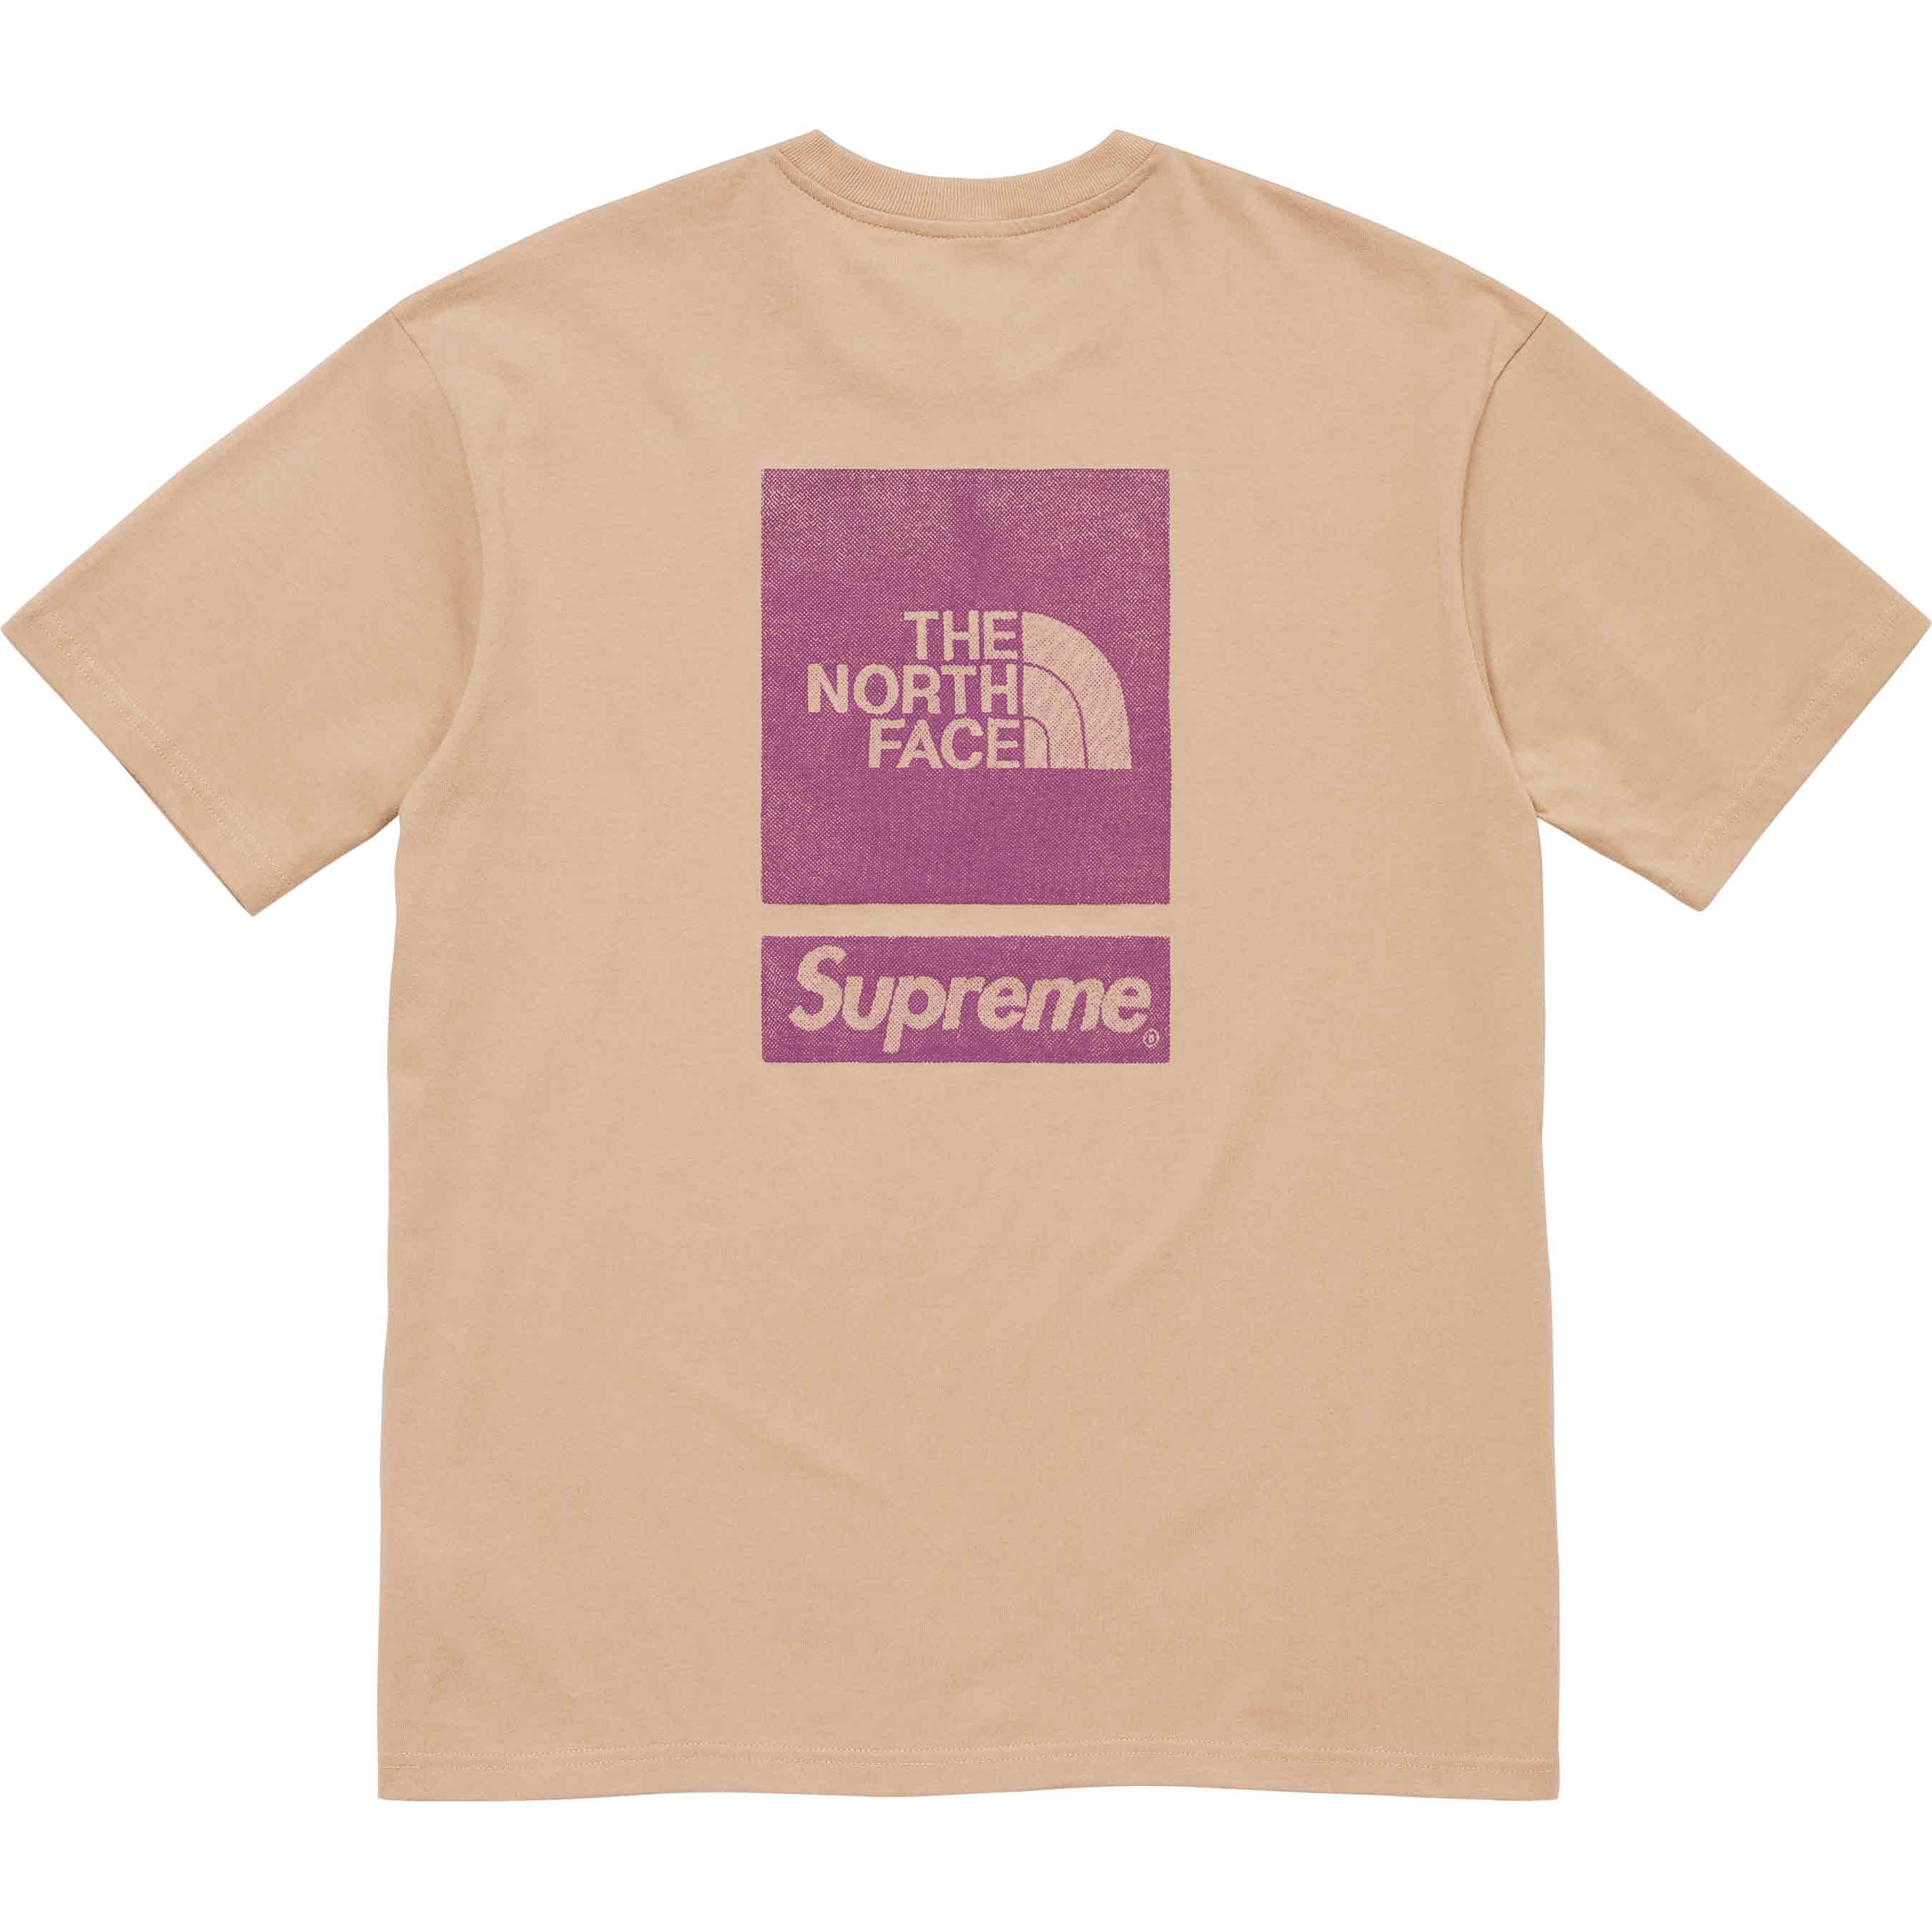 【XXL】Supreme x The North Face S/S Topかしこまりました